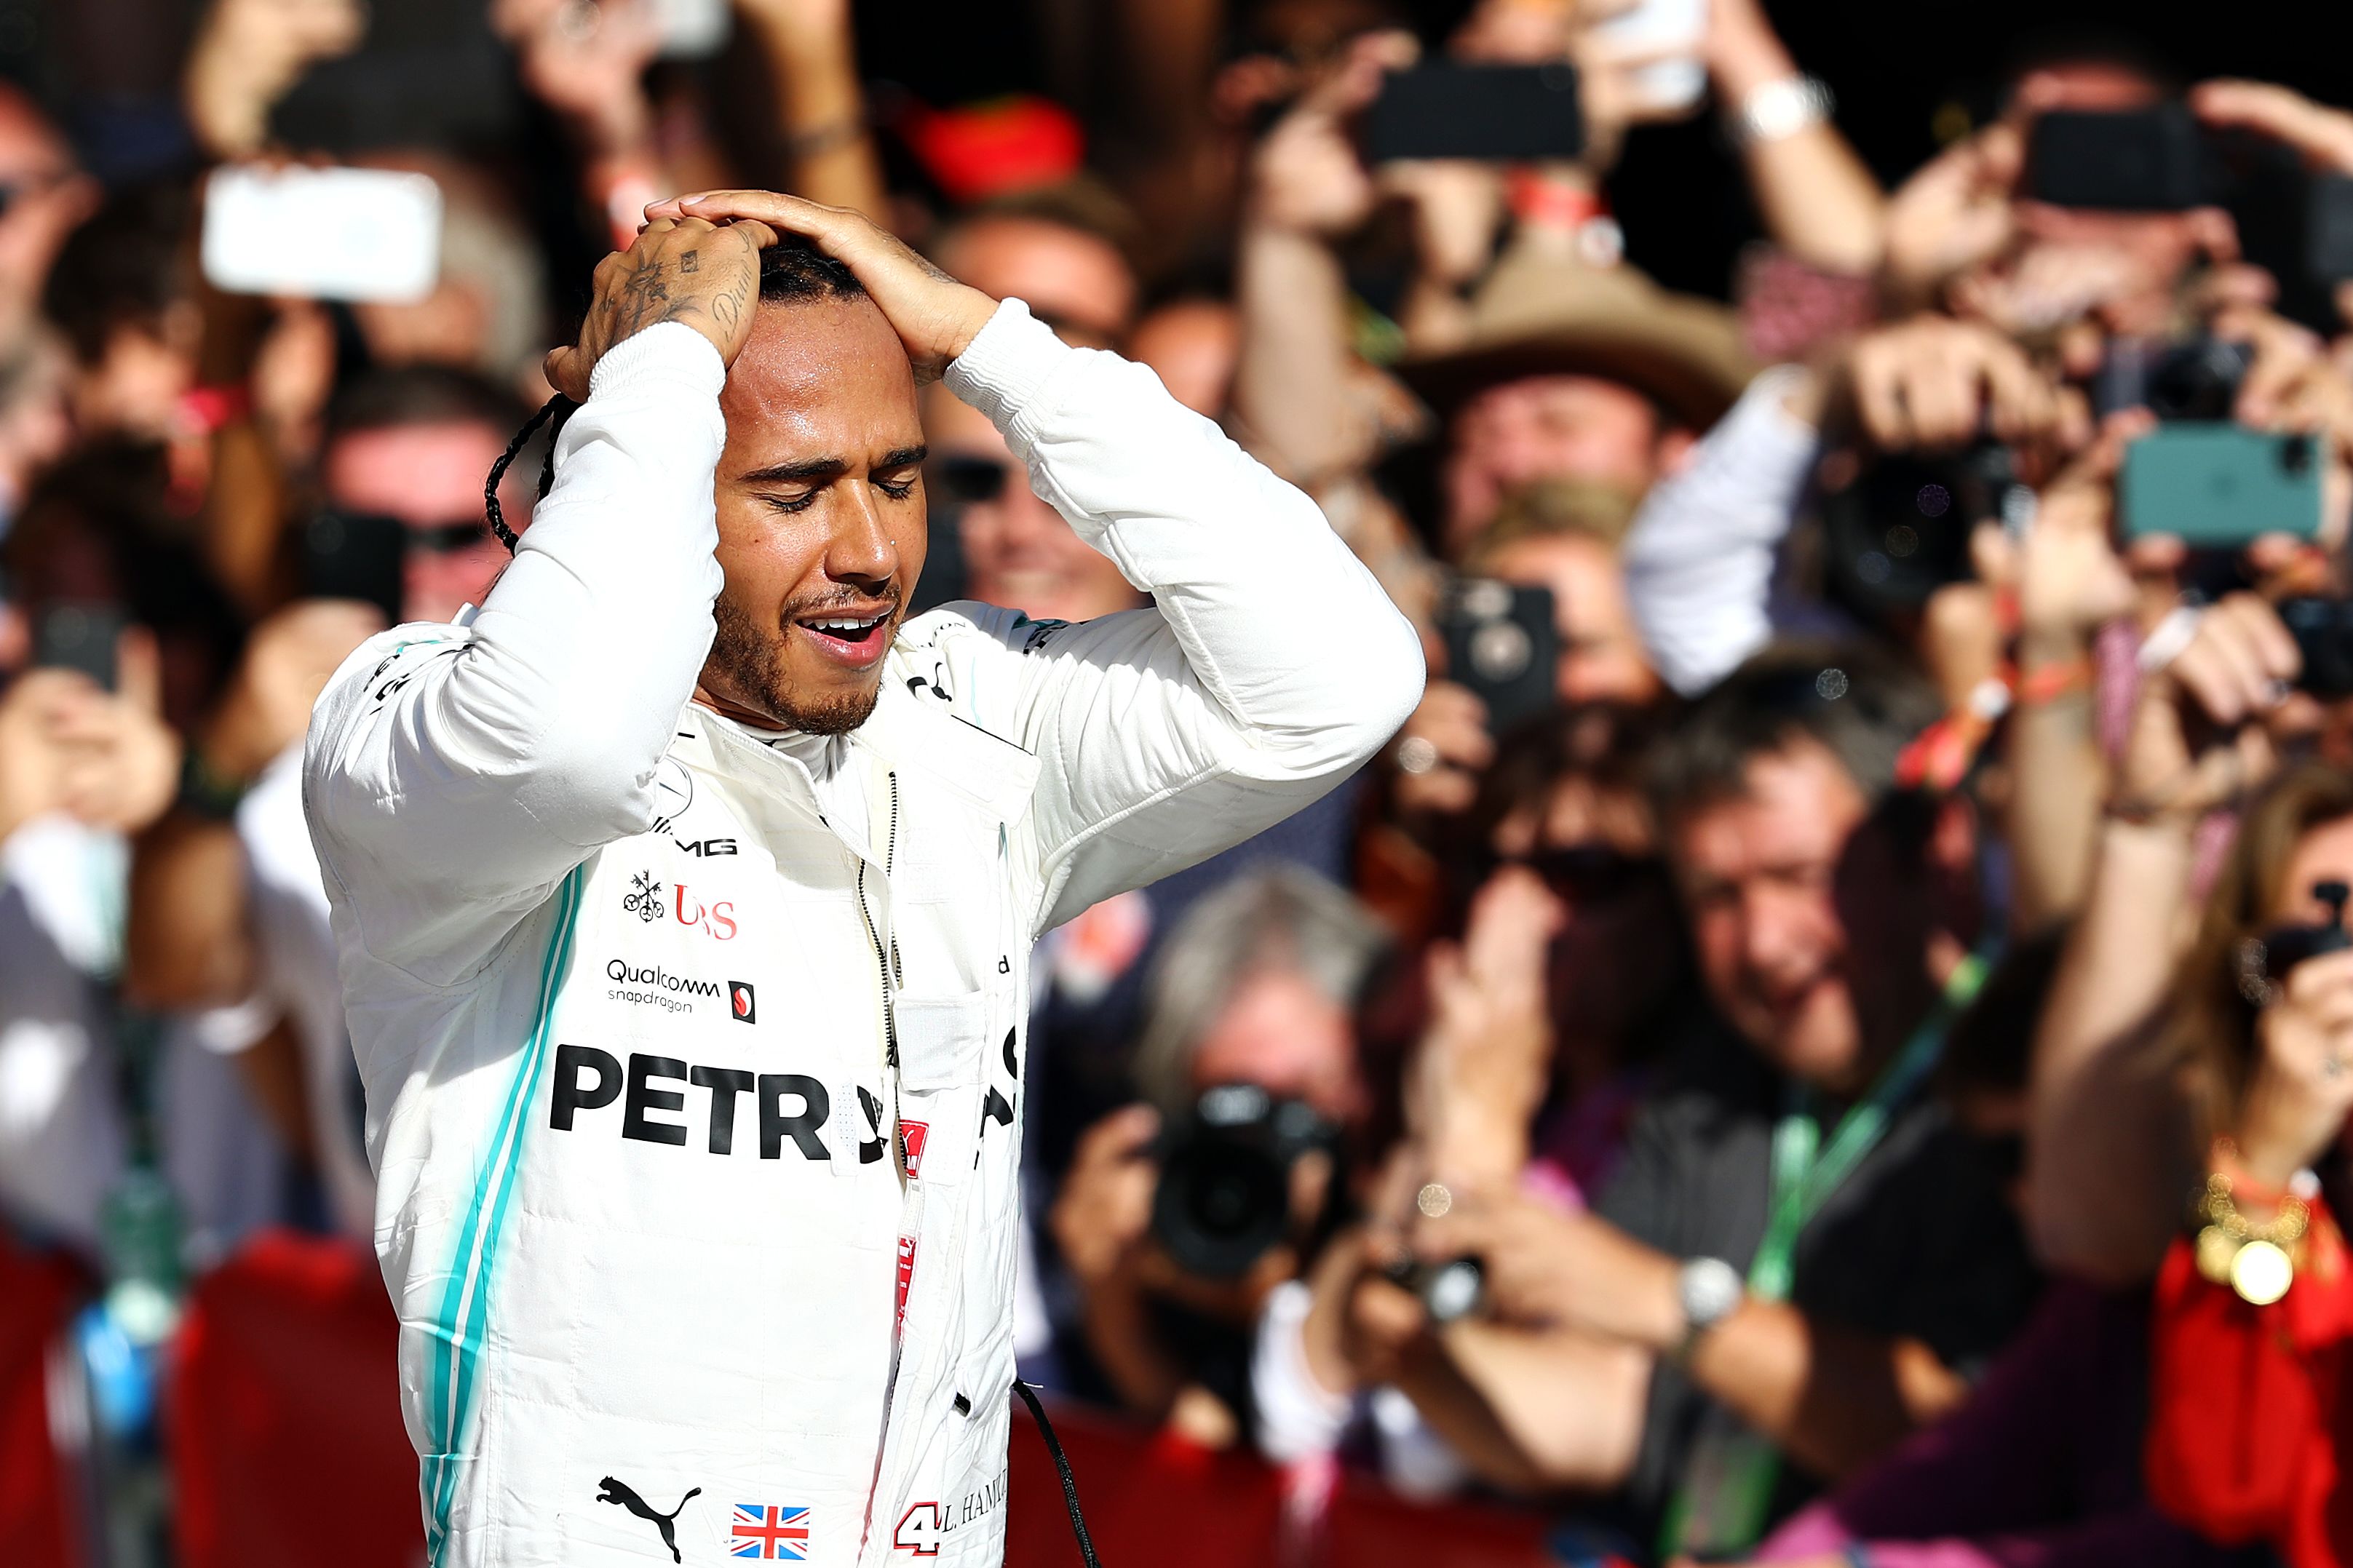 Lewis Hamilton wins F1 world championship title for sixth time